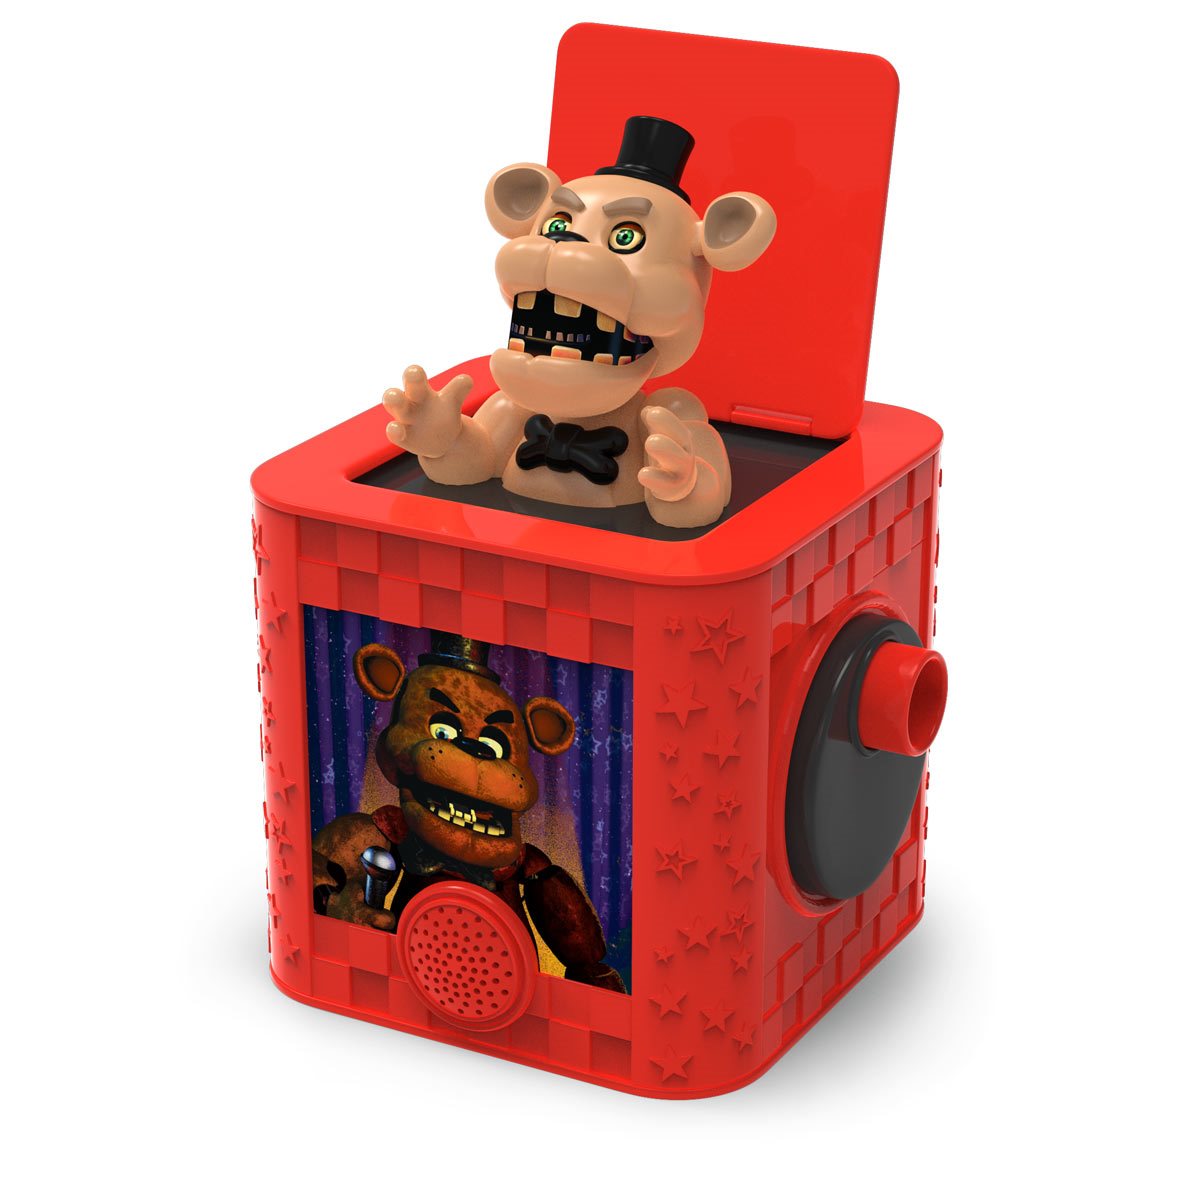 Five Nights at Freddy's: Survive 'Til 6AM Game – Security Breach Edition